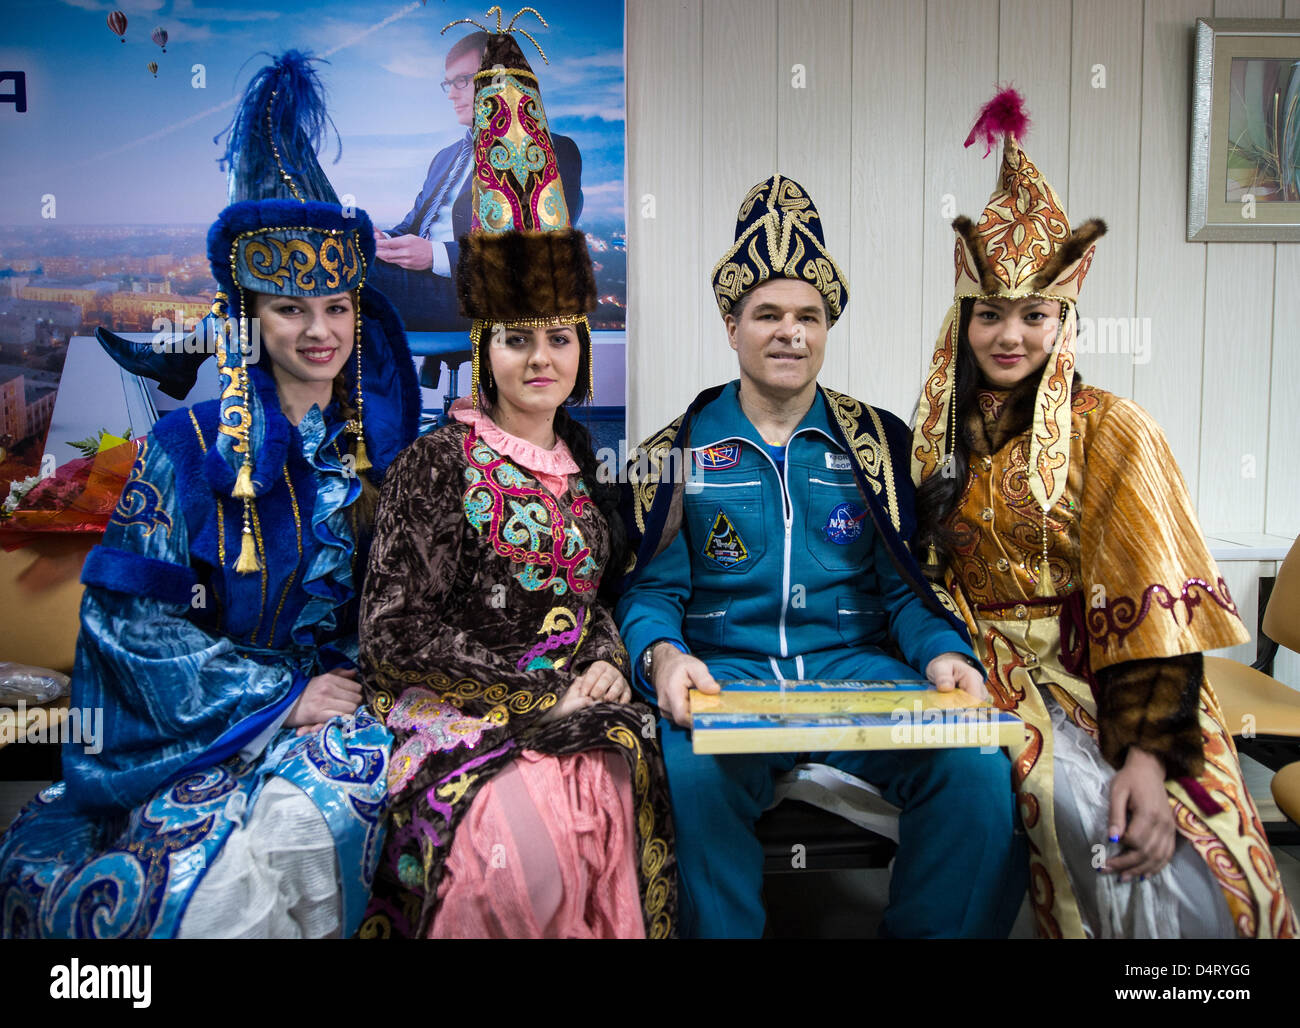 Expedition 34 Commander Kevin Ford of NASA poses for a photograph with women in ceremonial Kazakh dress at the Kustanay Airport March 16, 2013 in Arkalyk, Kazakhstan. Novitskiy, Tarelkin, and Ford returned from 142 days onboard the International Space Station where they served as members of the Expedition 33 and 34 crews. Stock Photo